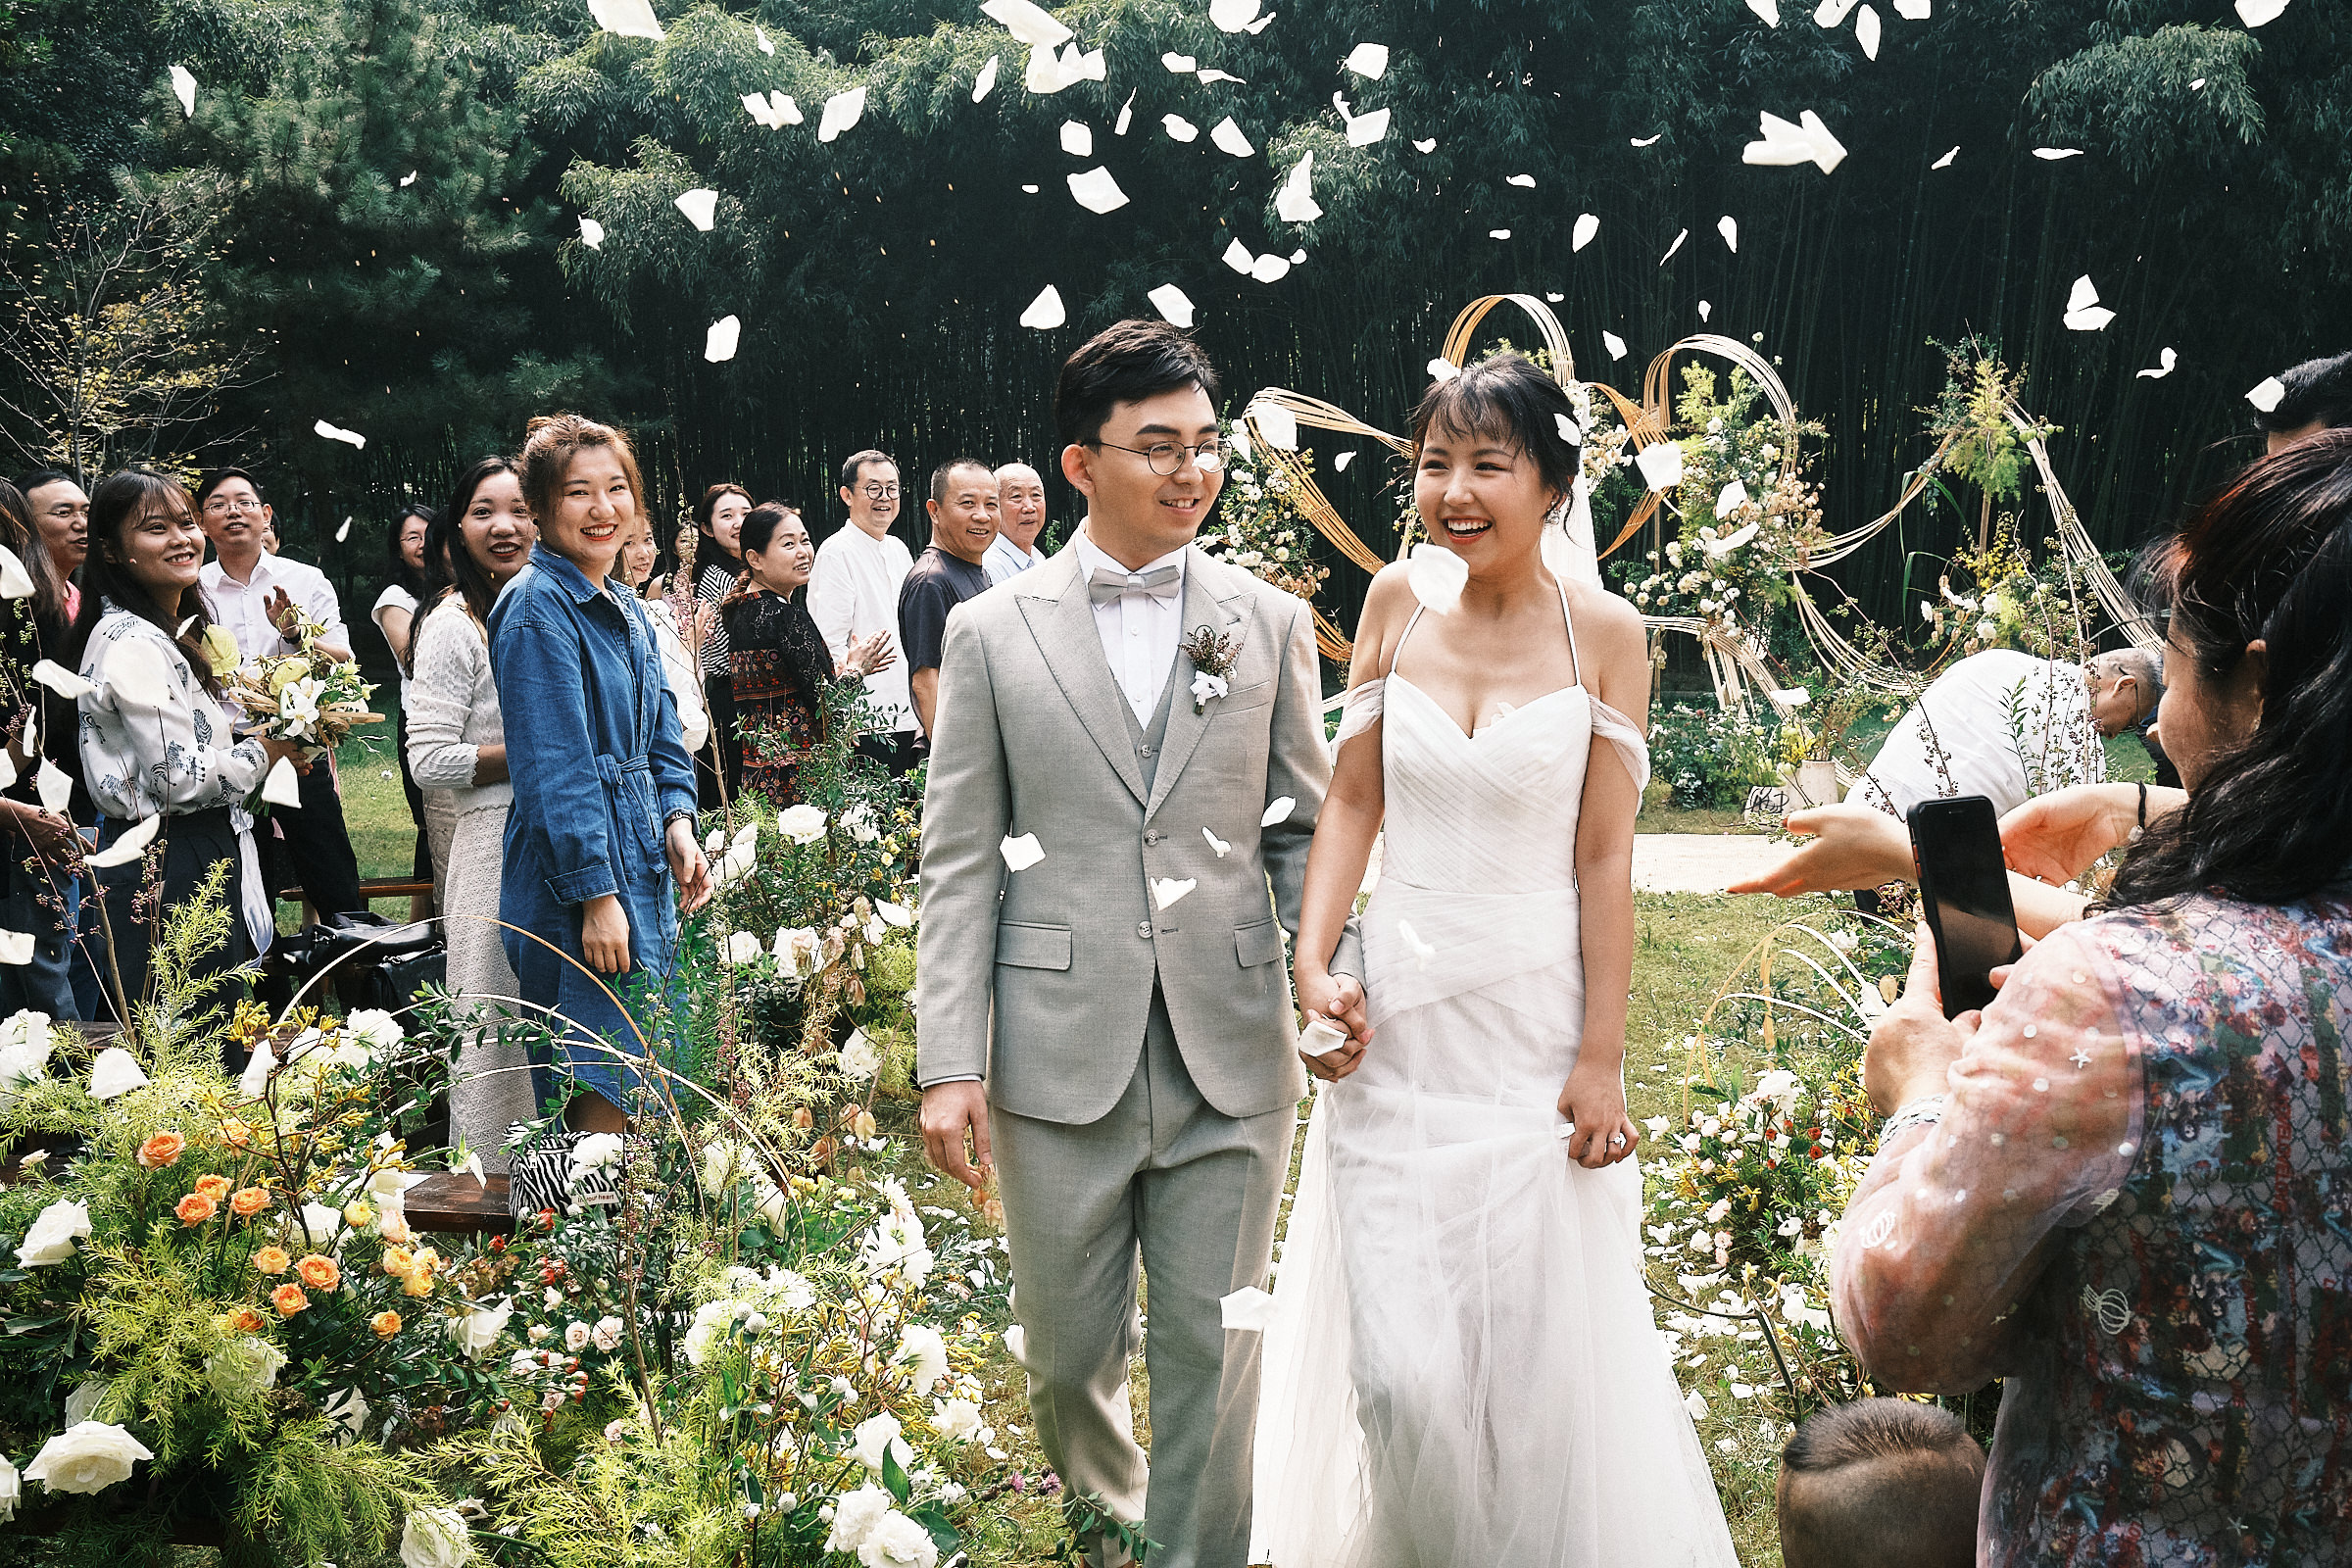 Bride And Groom Exit Ceremony With Petals Thrown In The Air